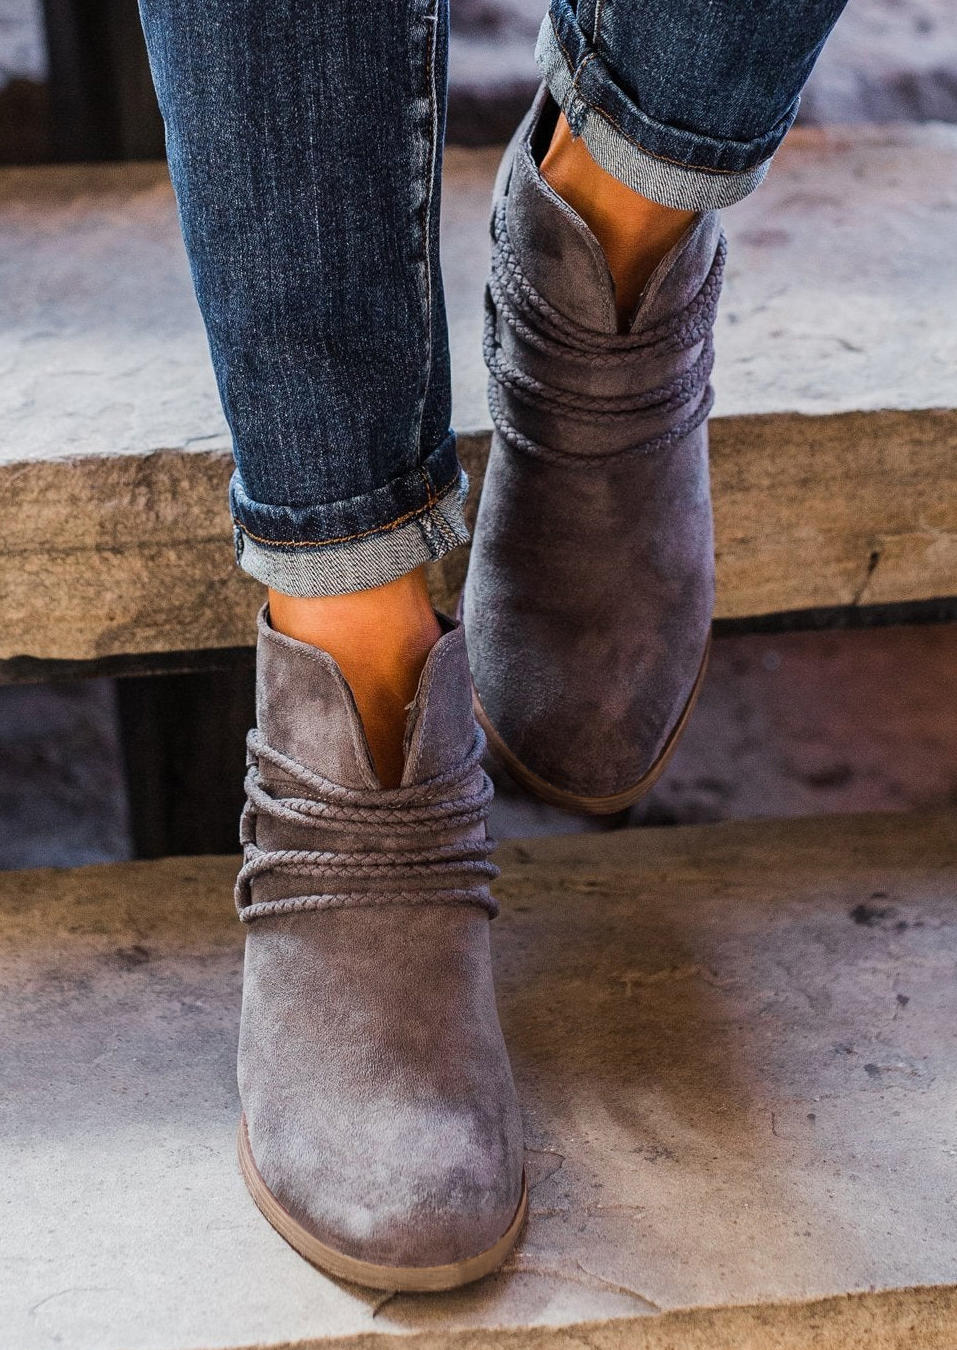 Lace Up Round Toe Heeled Boots - Gray